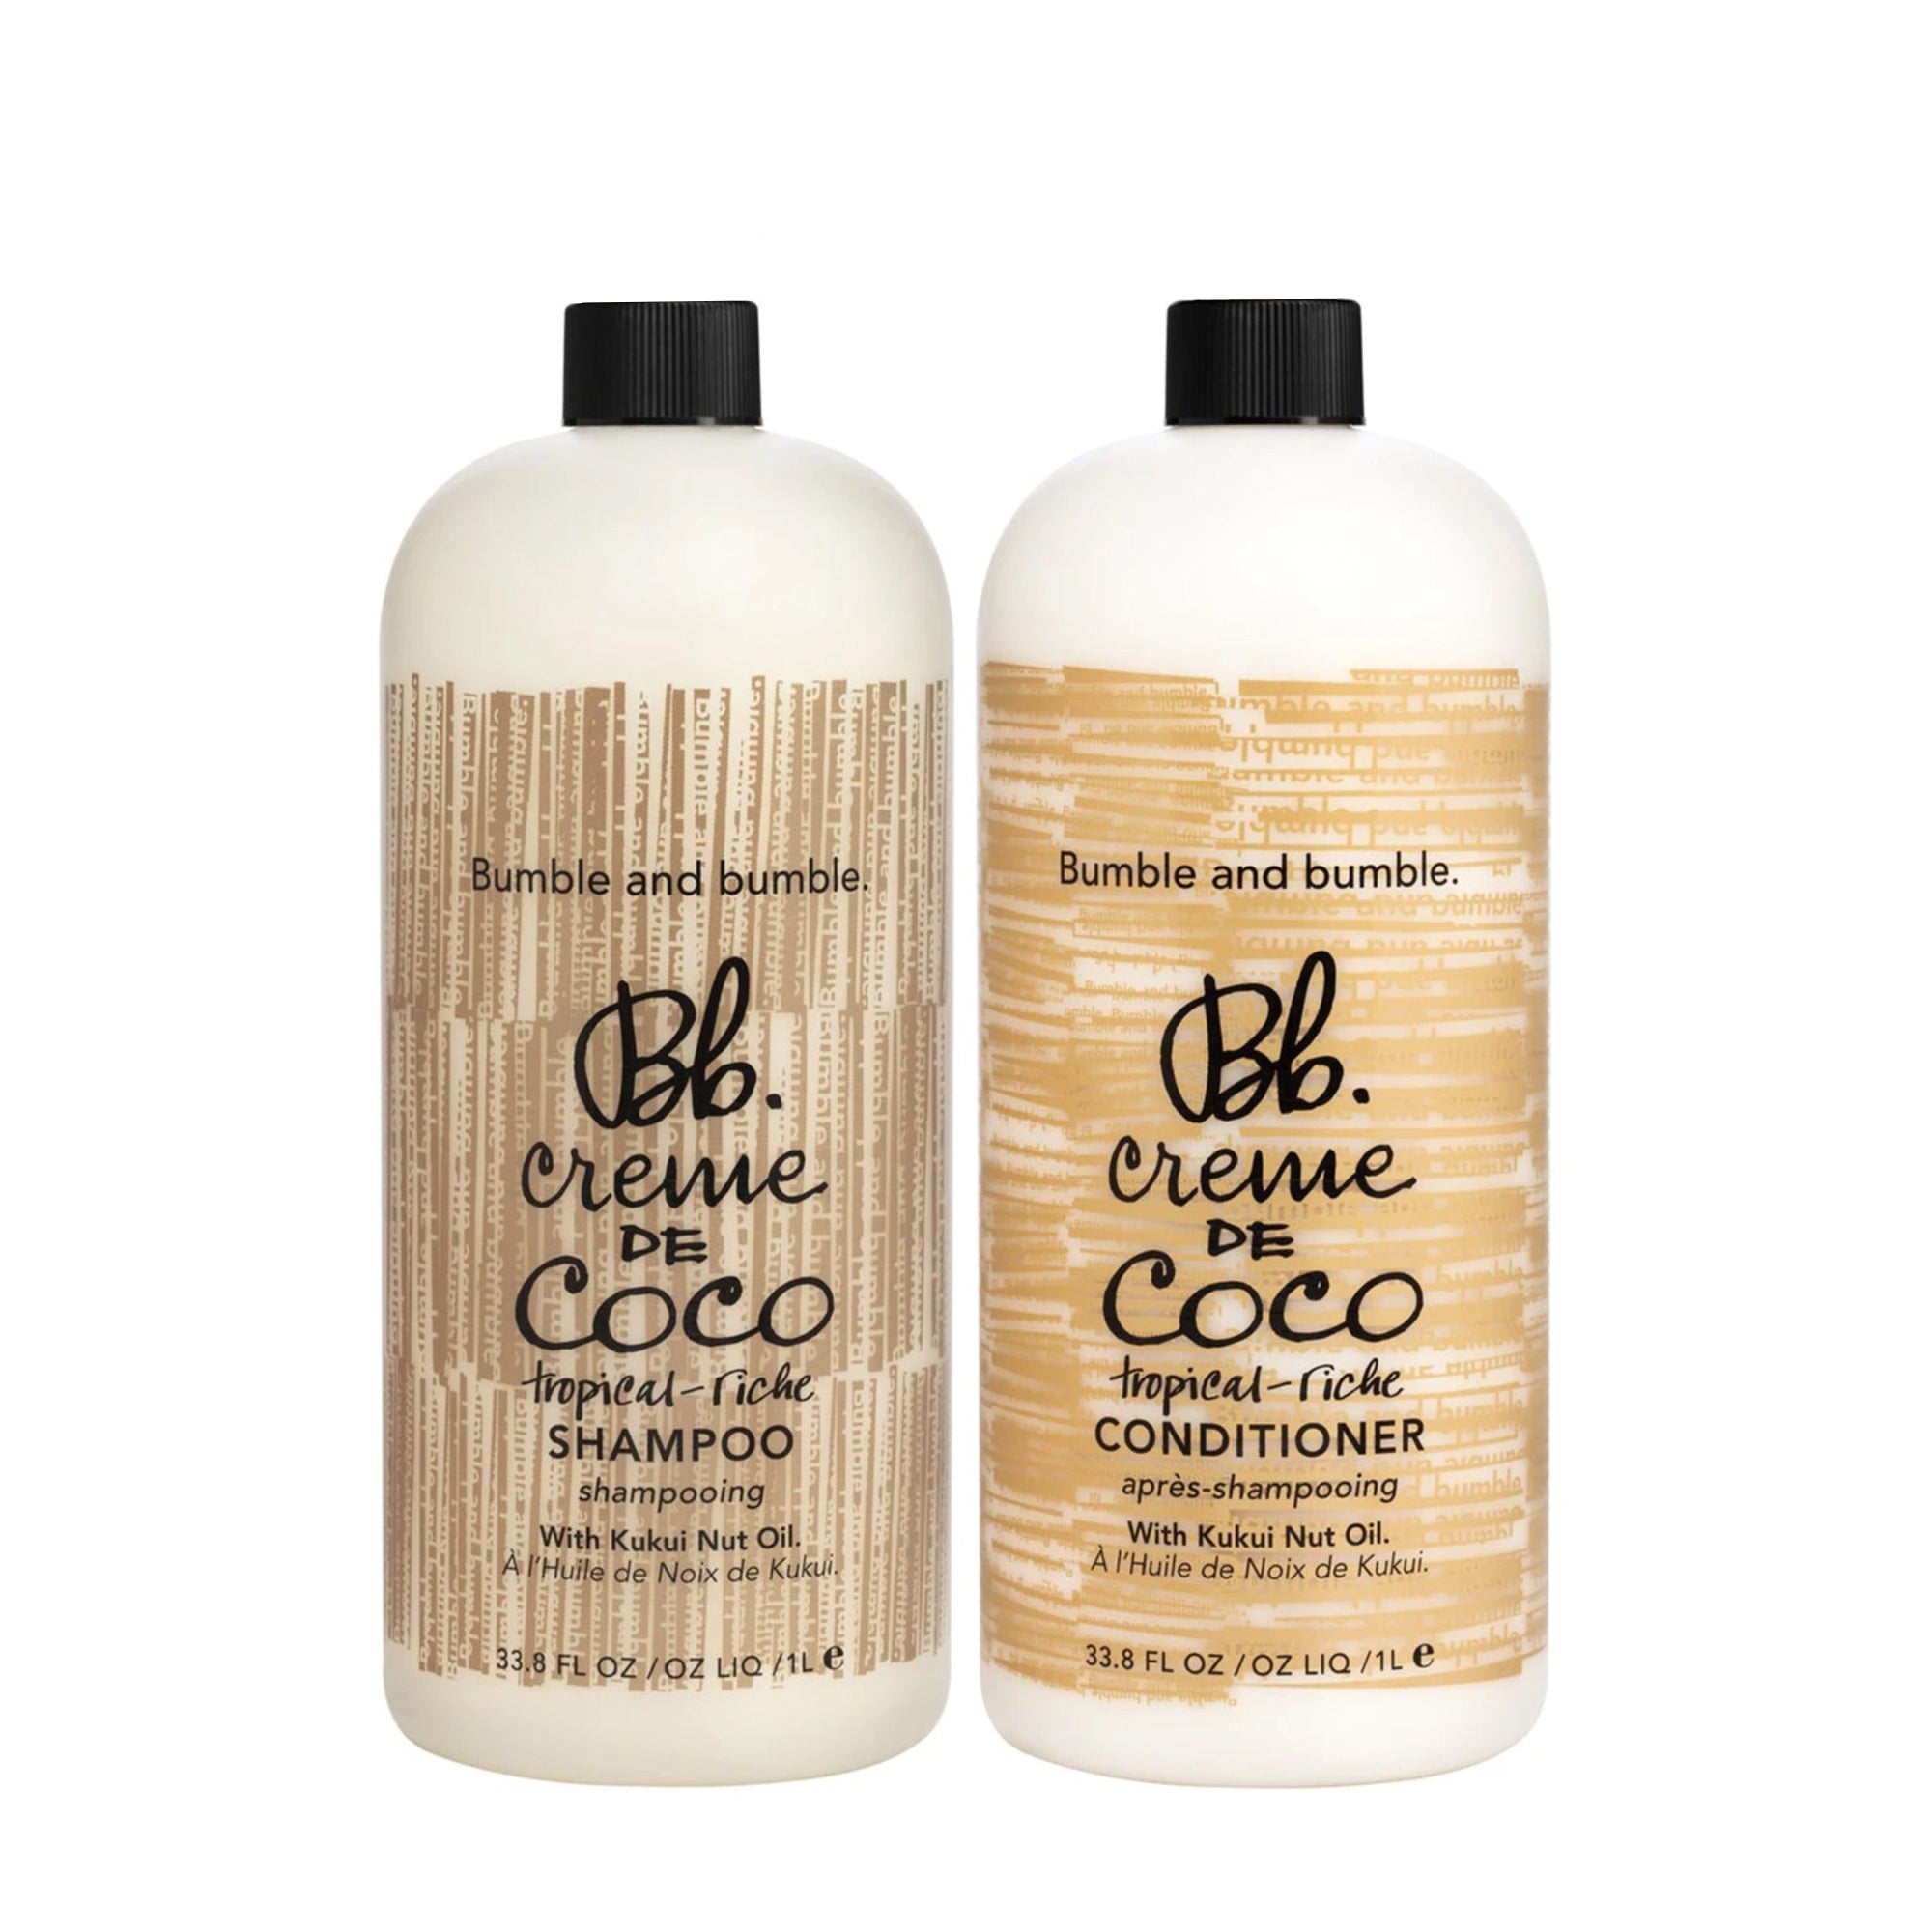 Bumble and bumble Bb.Crème de Coco Shampoo and Conditioner Liter Duo ($175 Value) / LITER